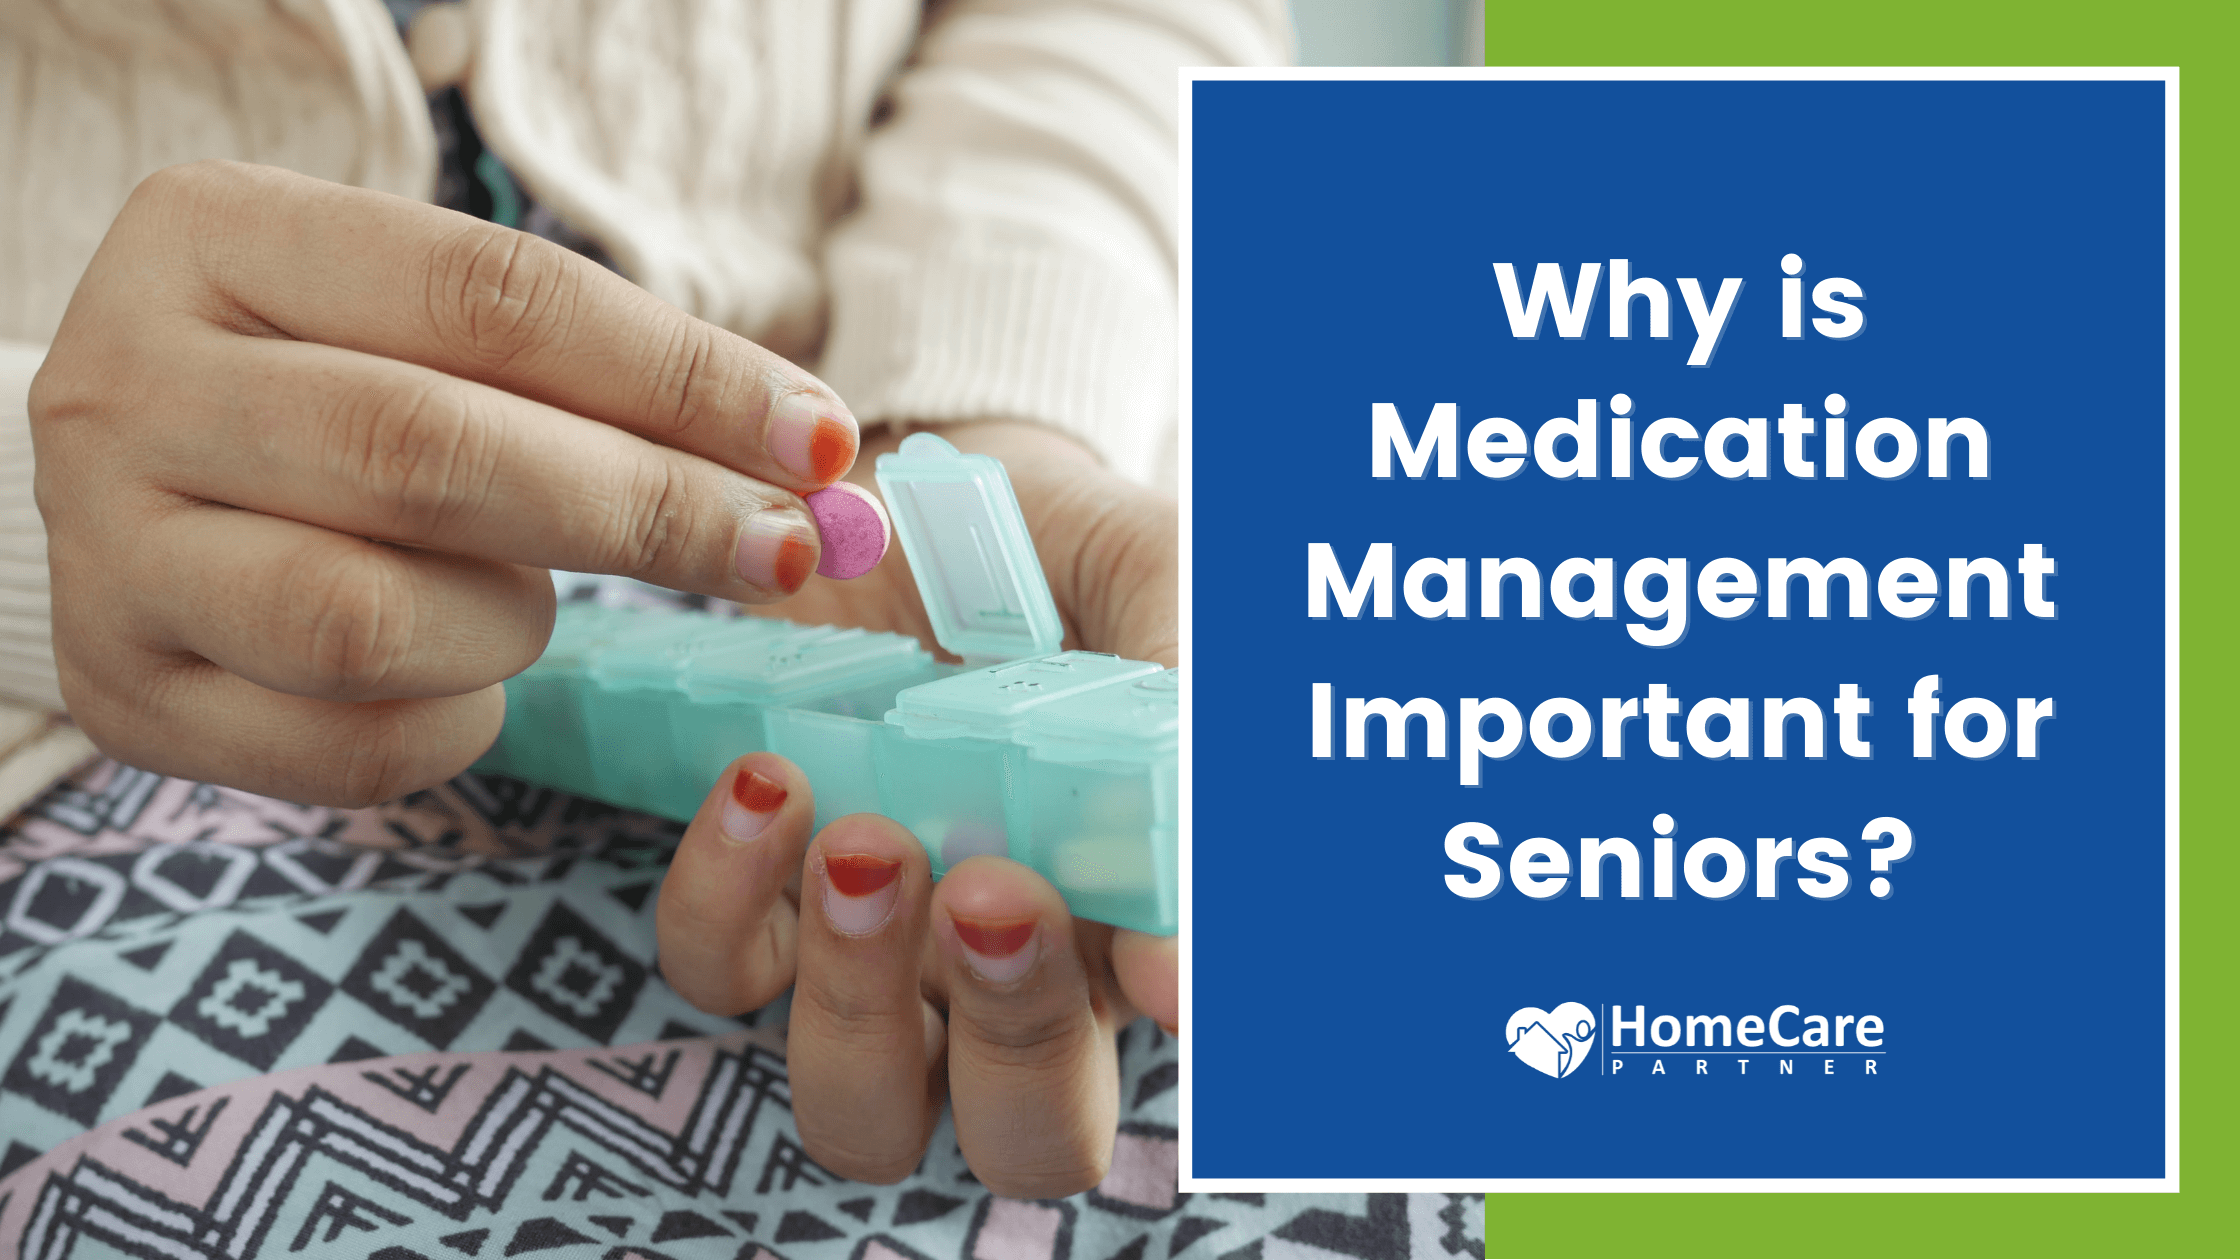 Why is Medication Management Important for Seniors?